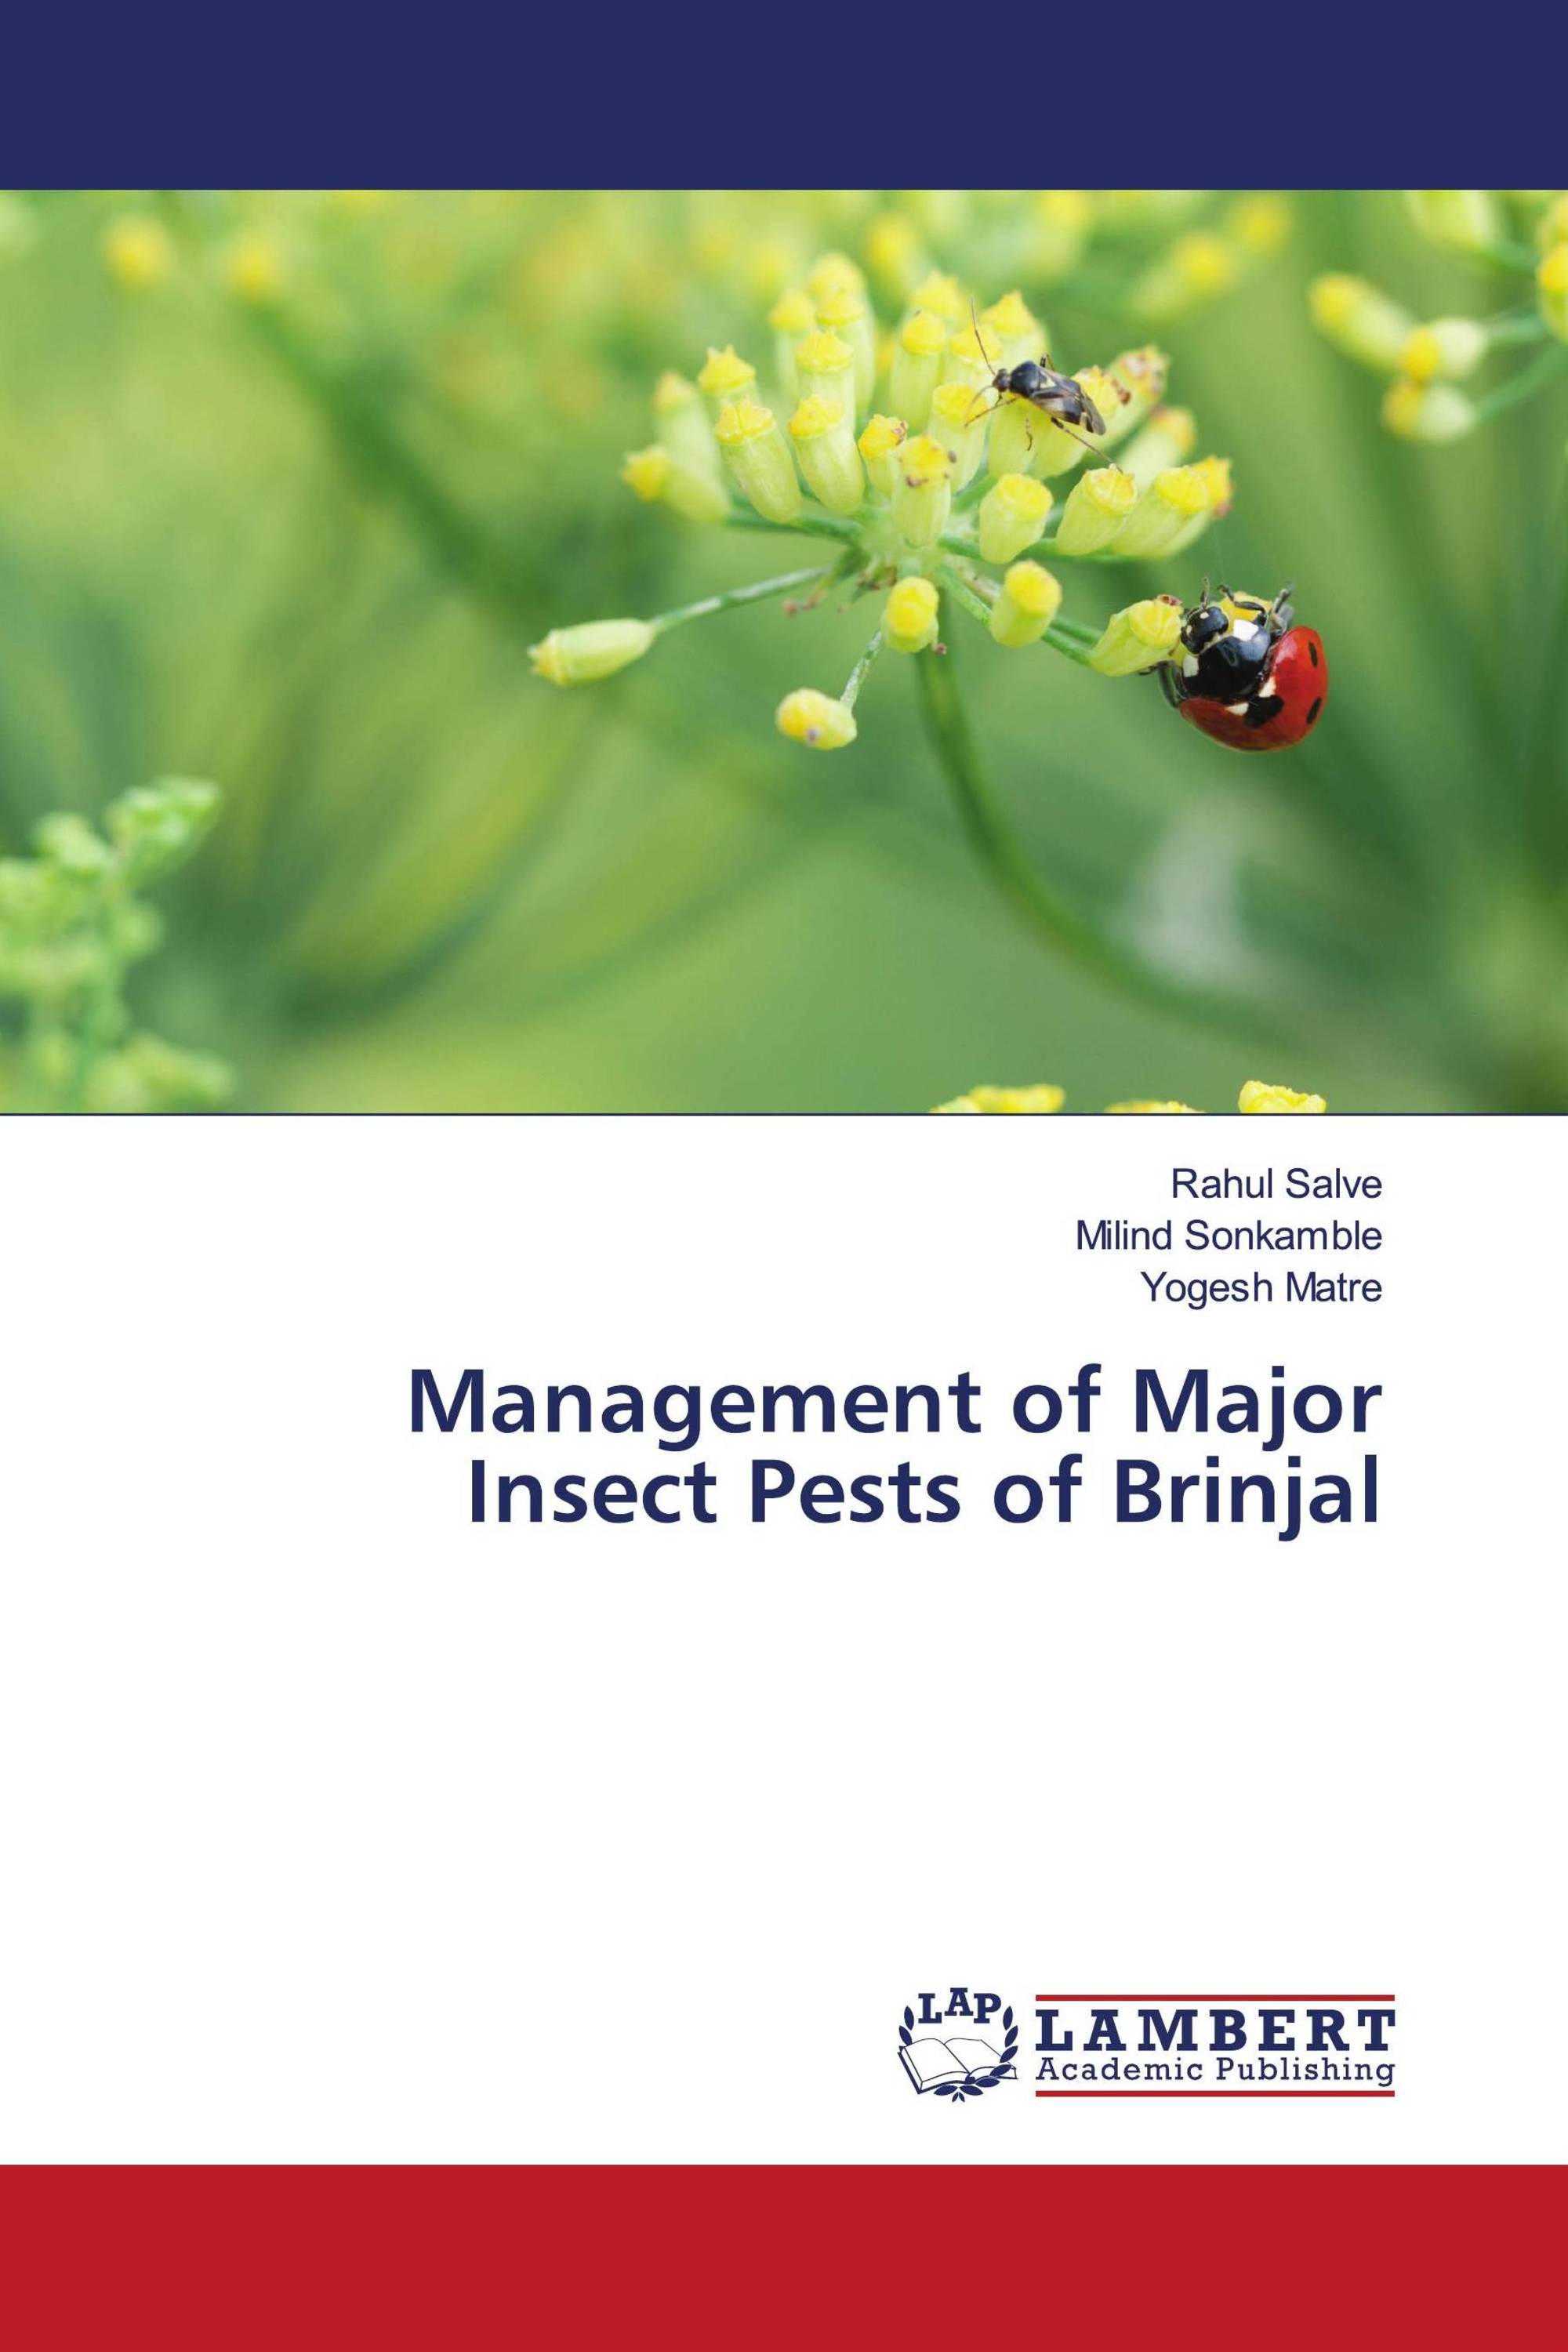 Management of Major Insect Pests of Brinjal